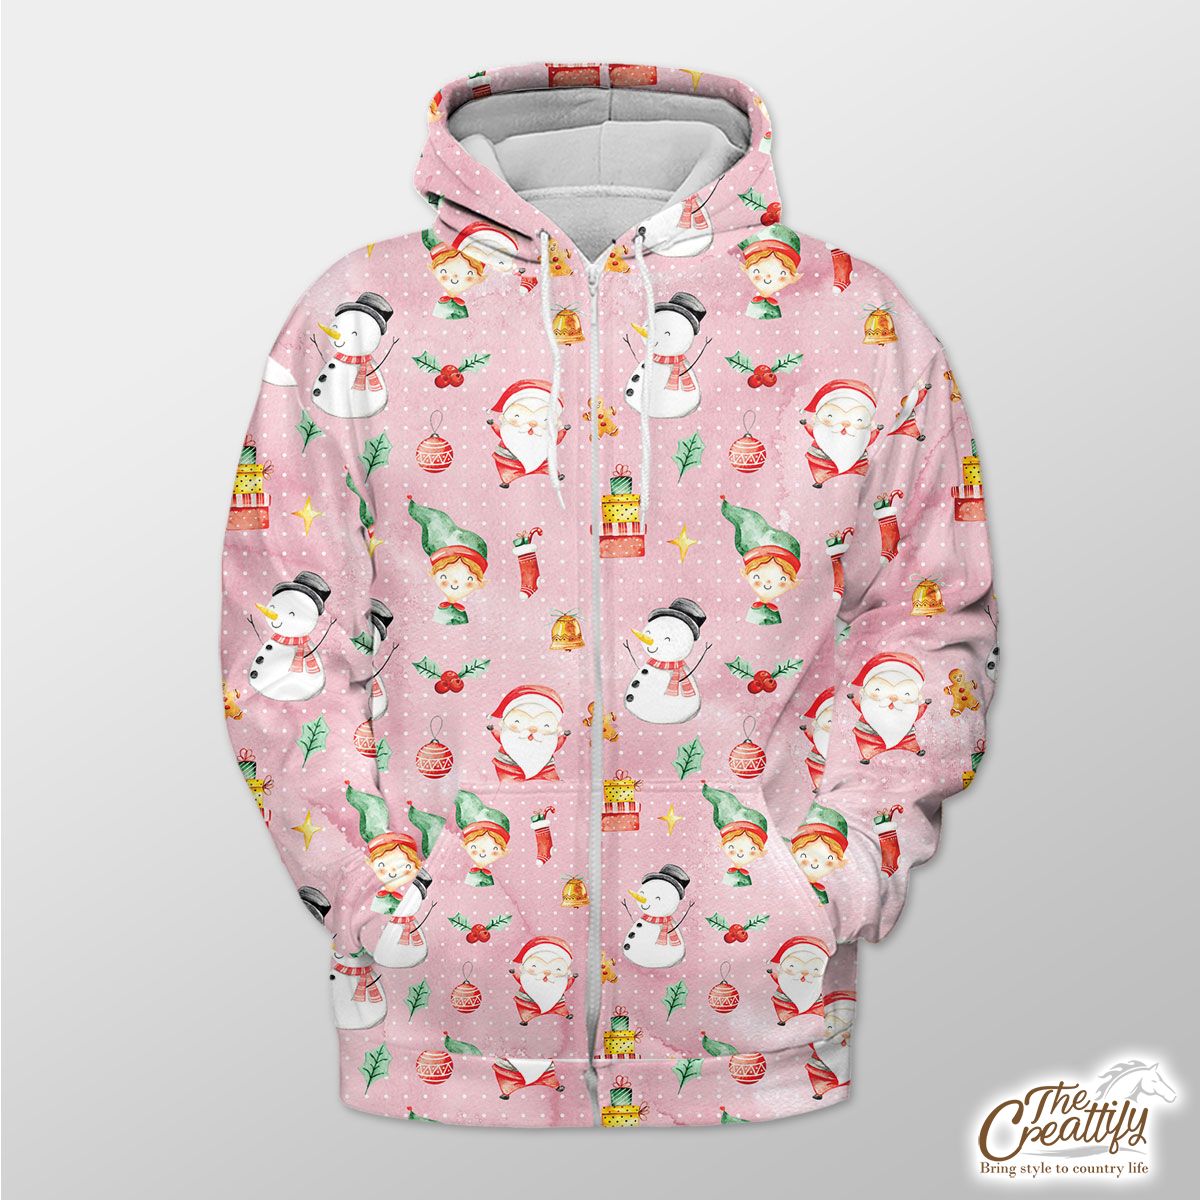 Santa Clause, Snowman And Christmas Elf With Christmas Gifts Zip Hoodie